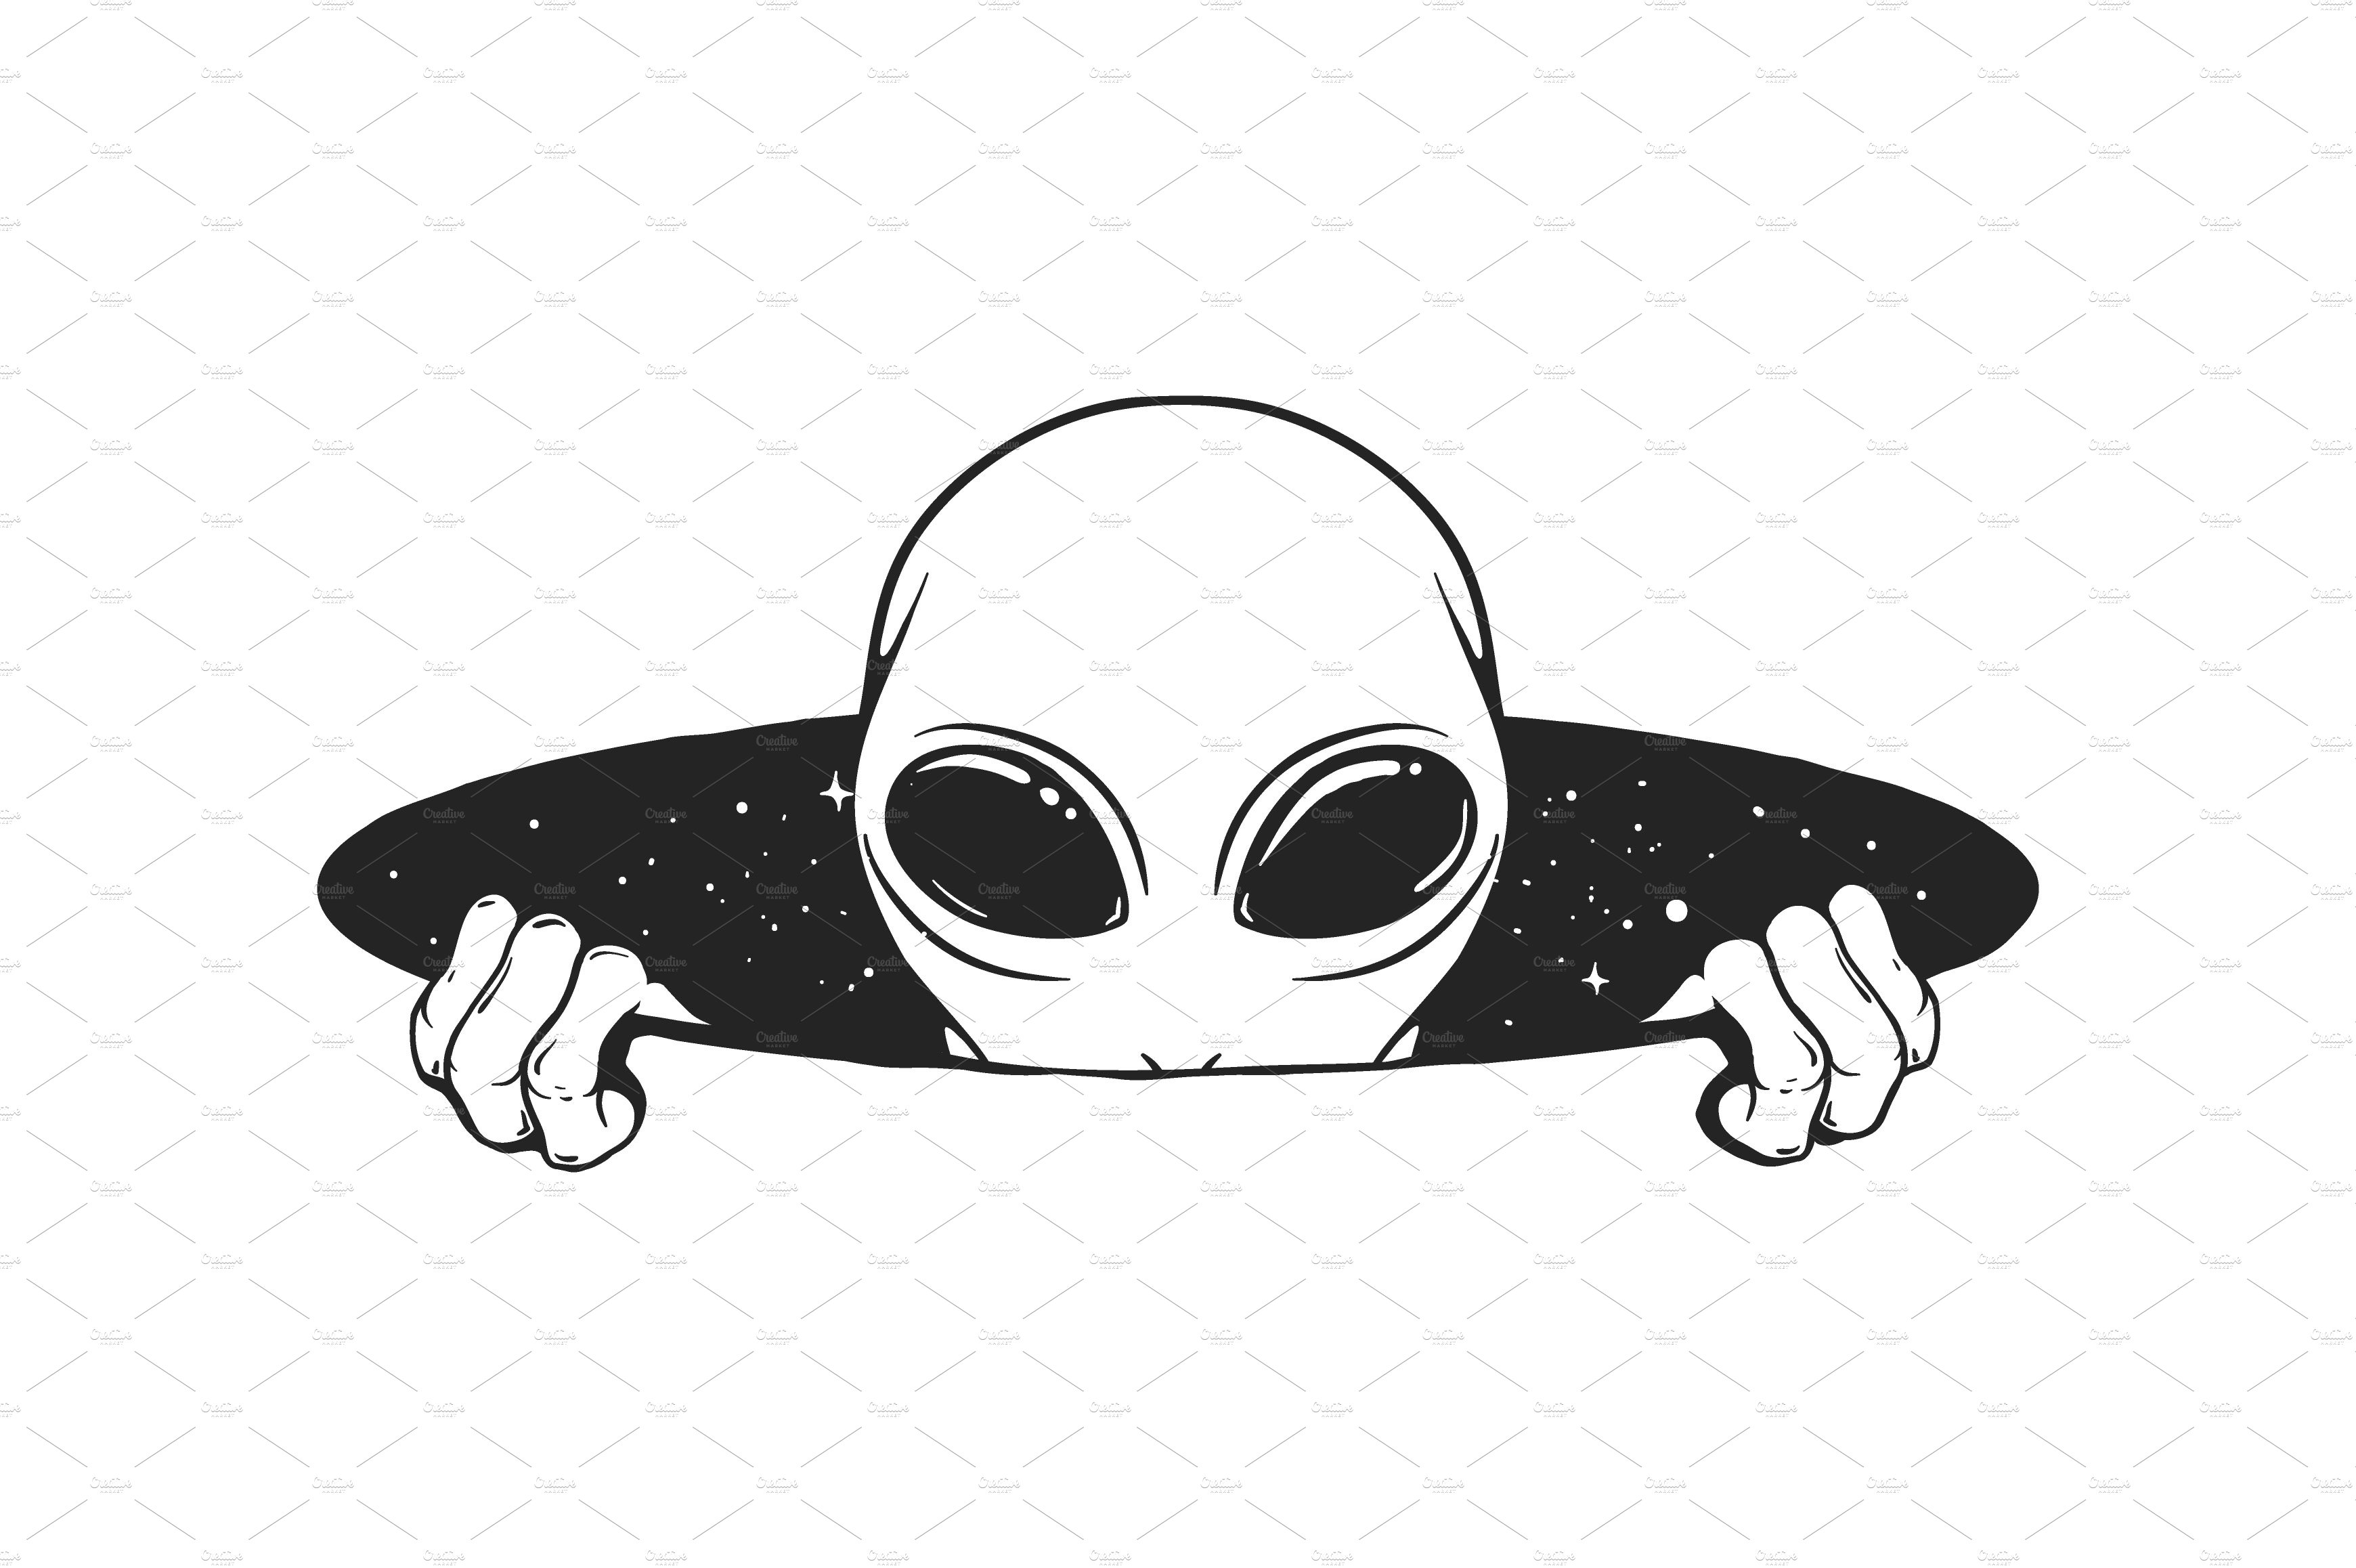 alien to climb out of a space hole cover image.